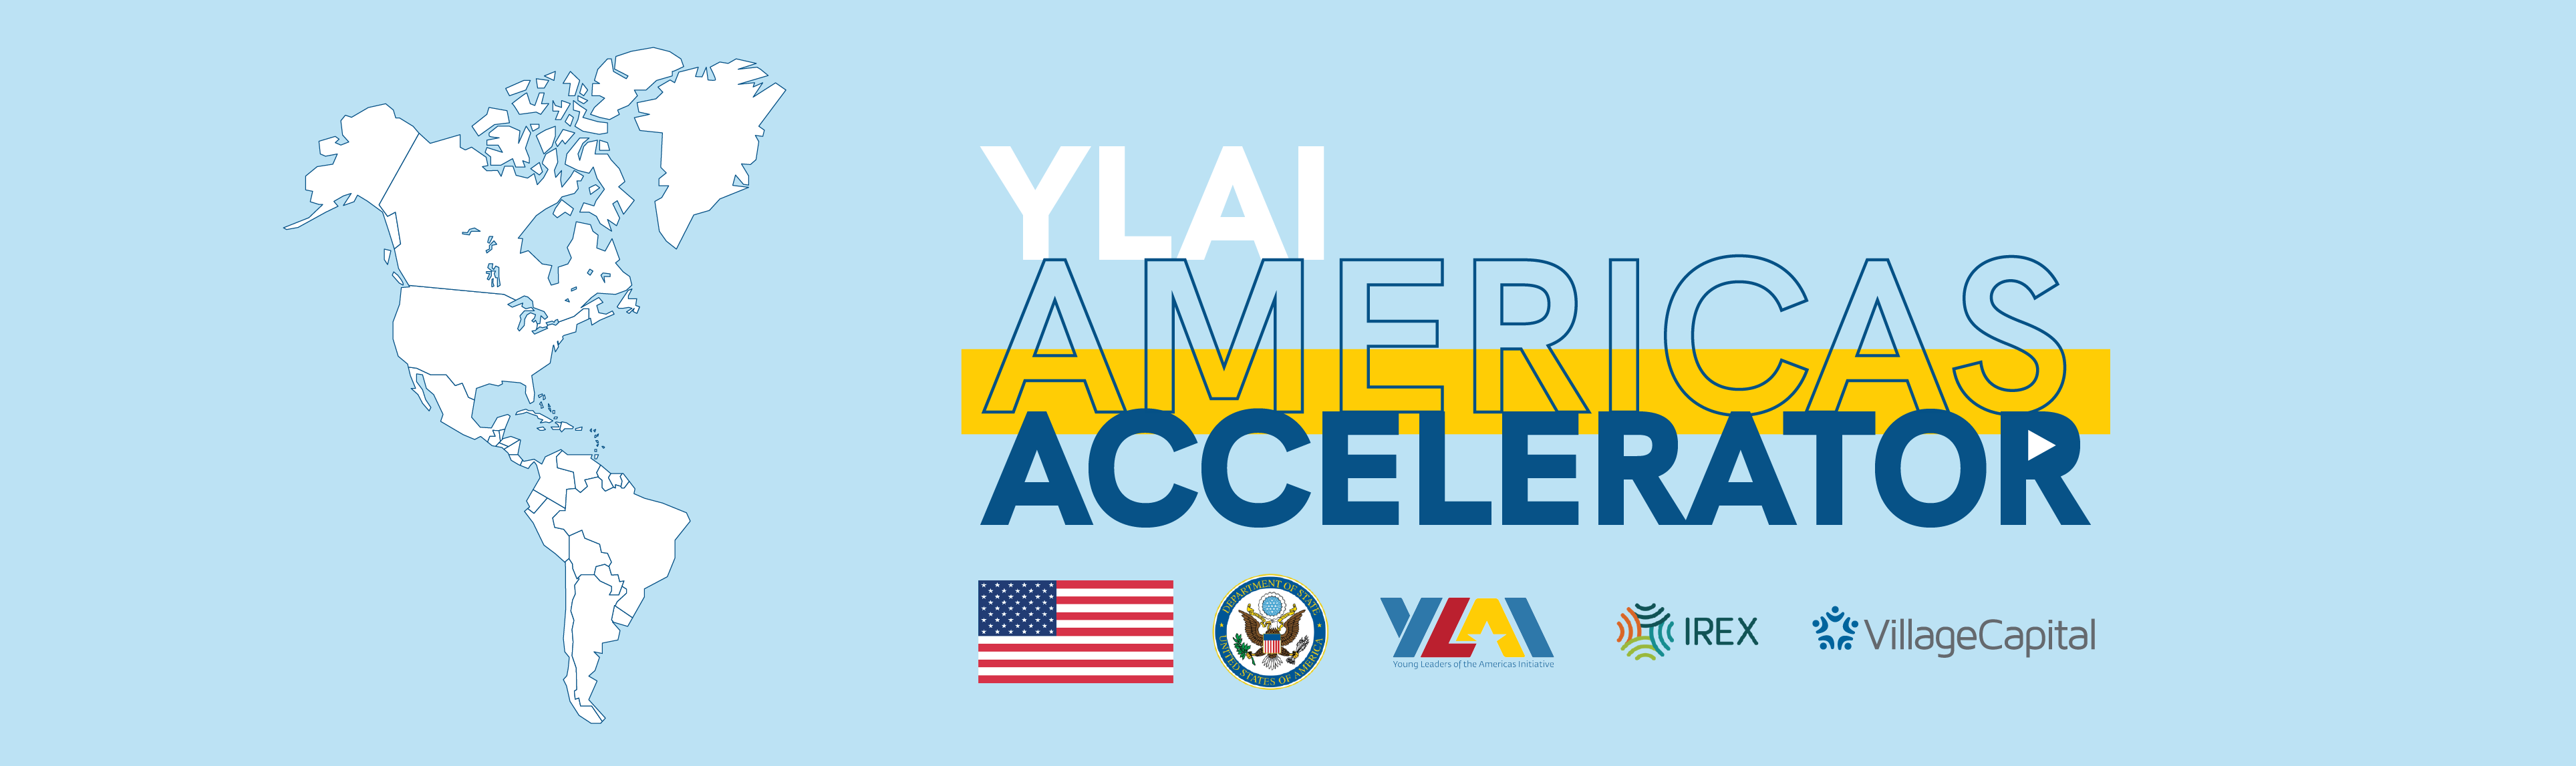 YLAI Press Release Banner